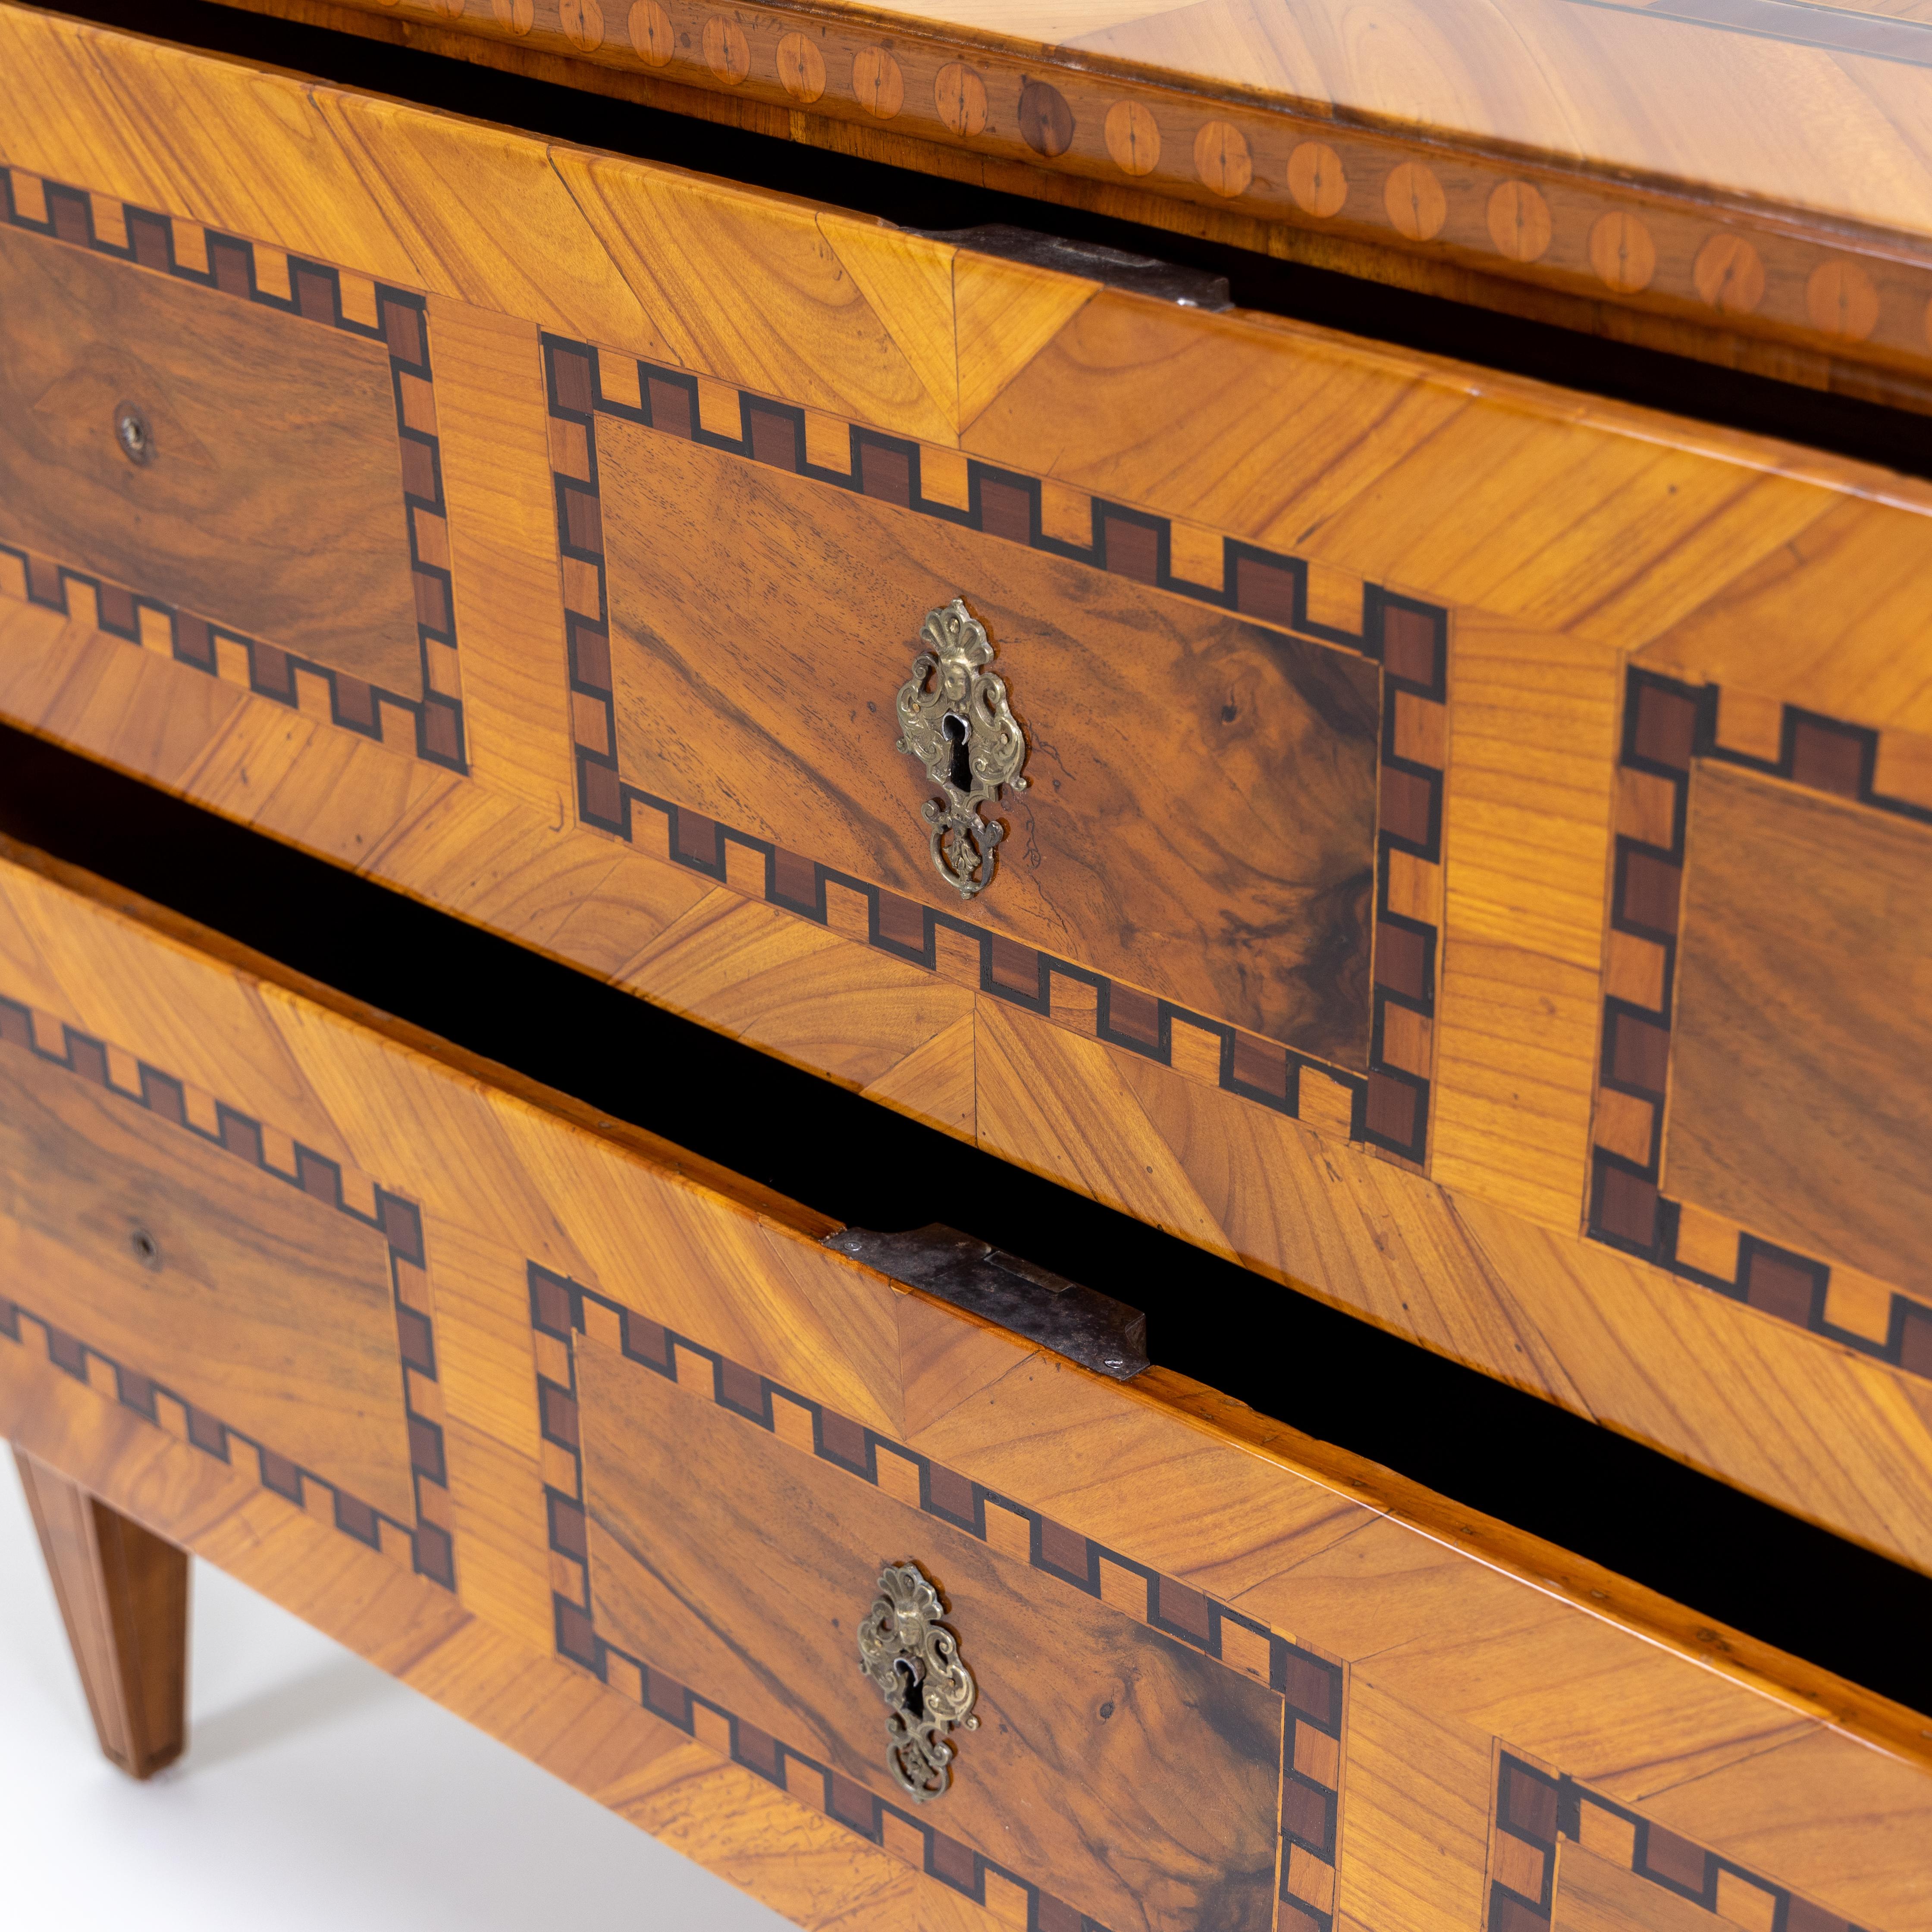 Cherry Classicistic Chest of Drawers, South German, c. 1790